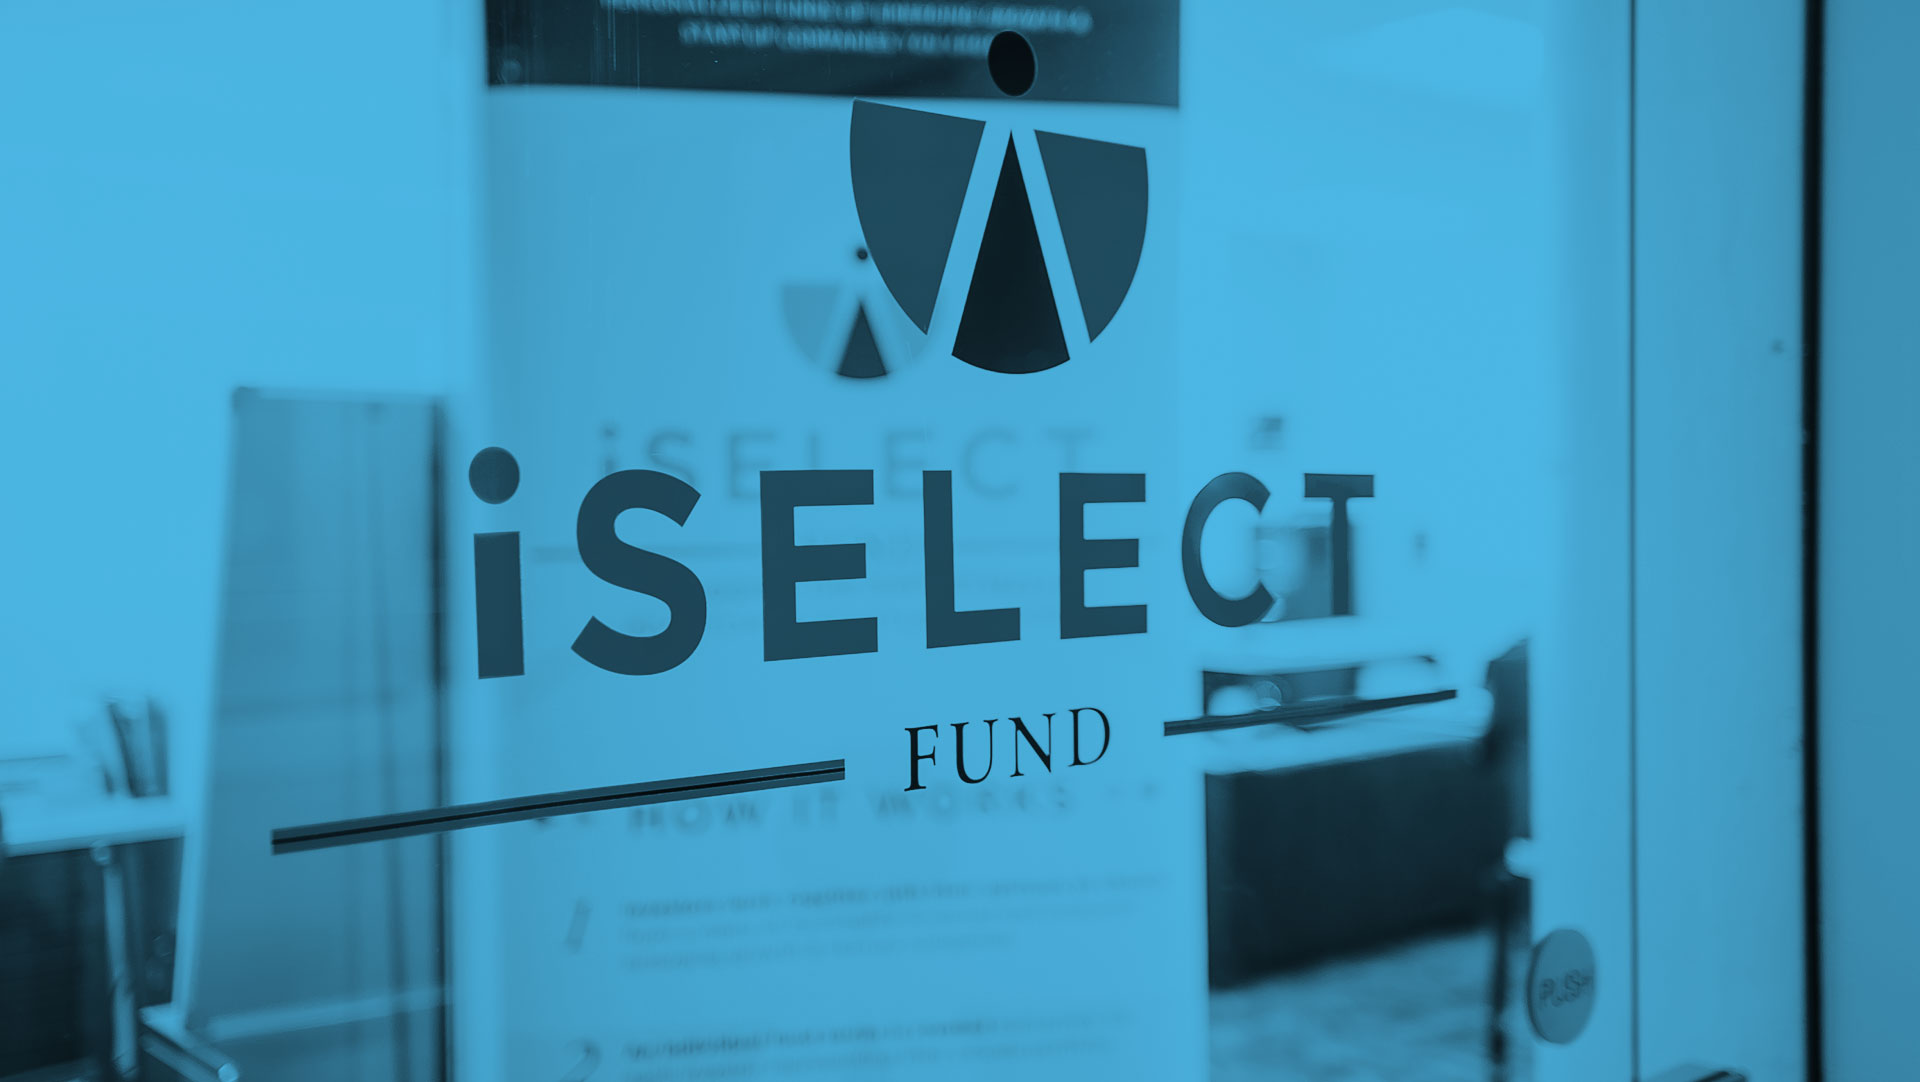 What Is the Appeal of iSelect to Investors?